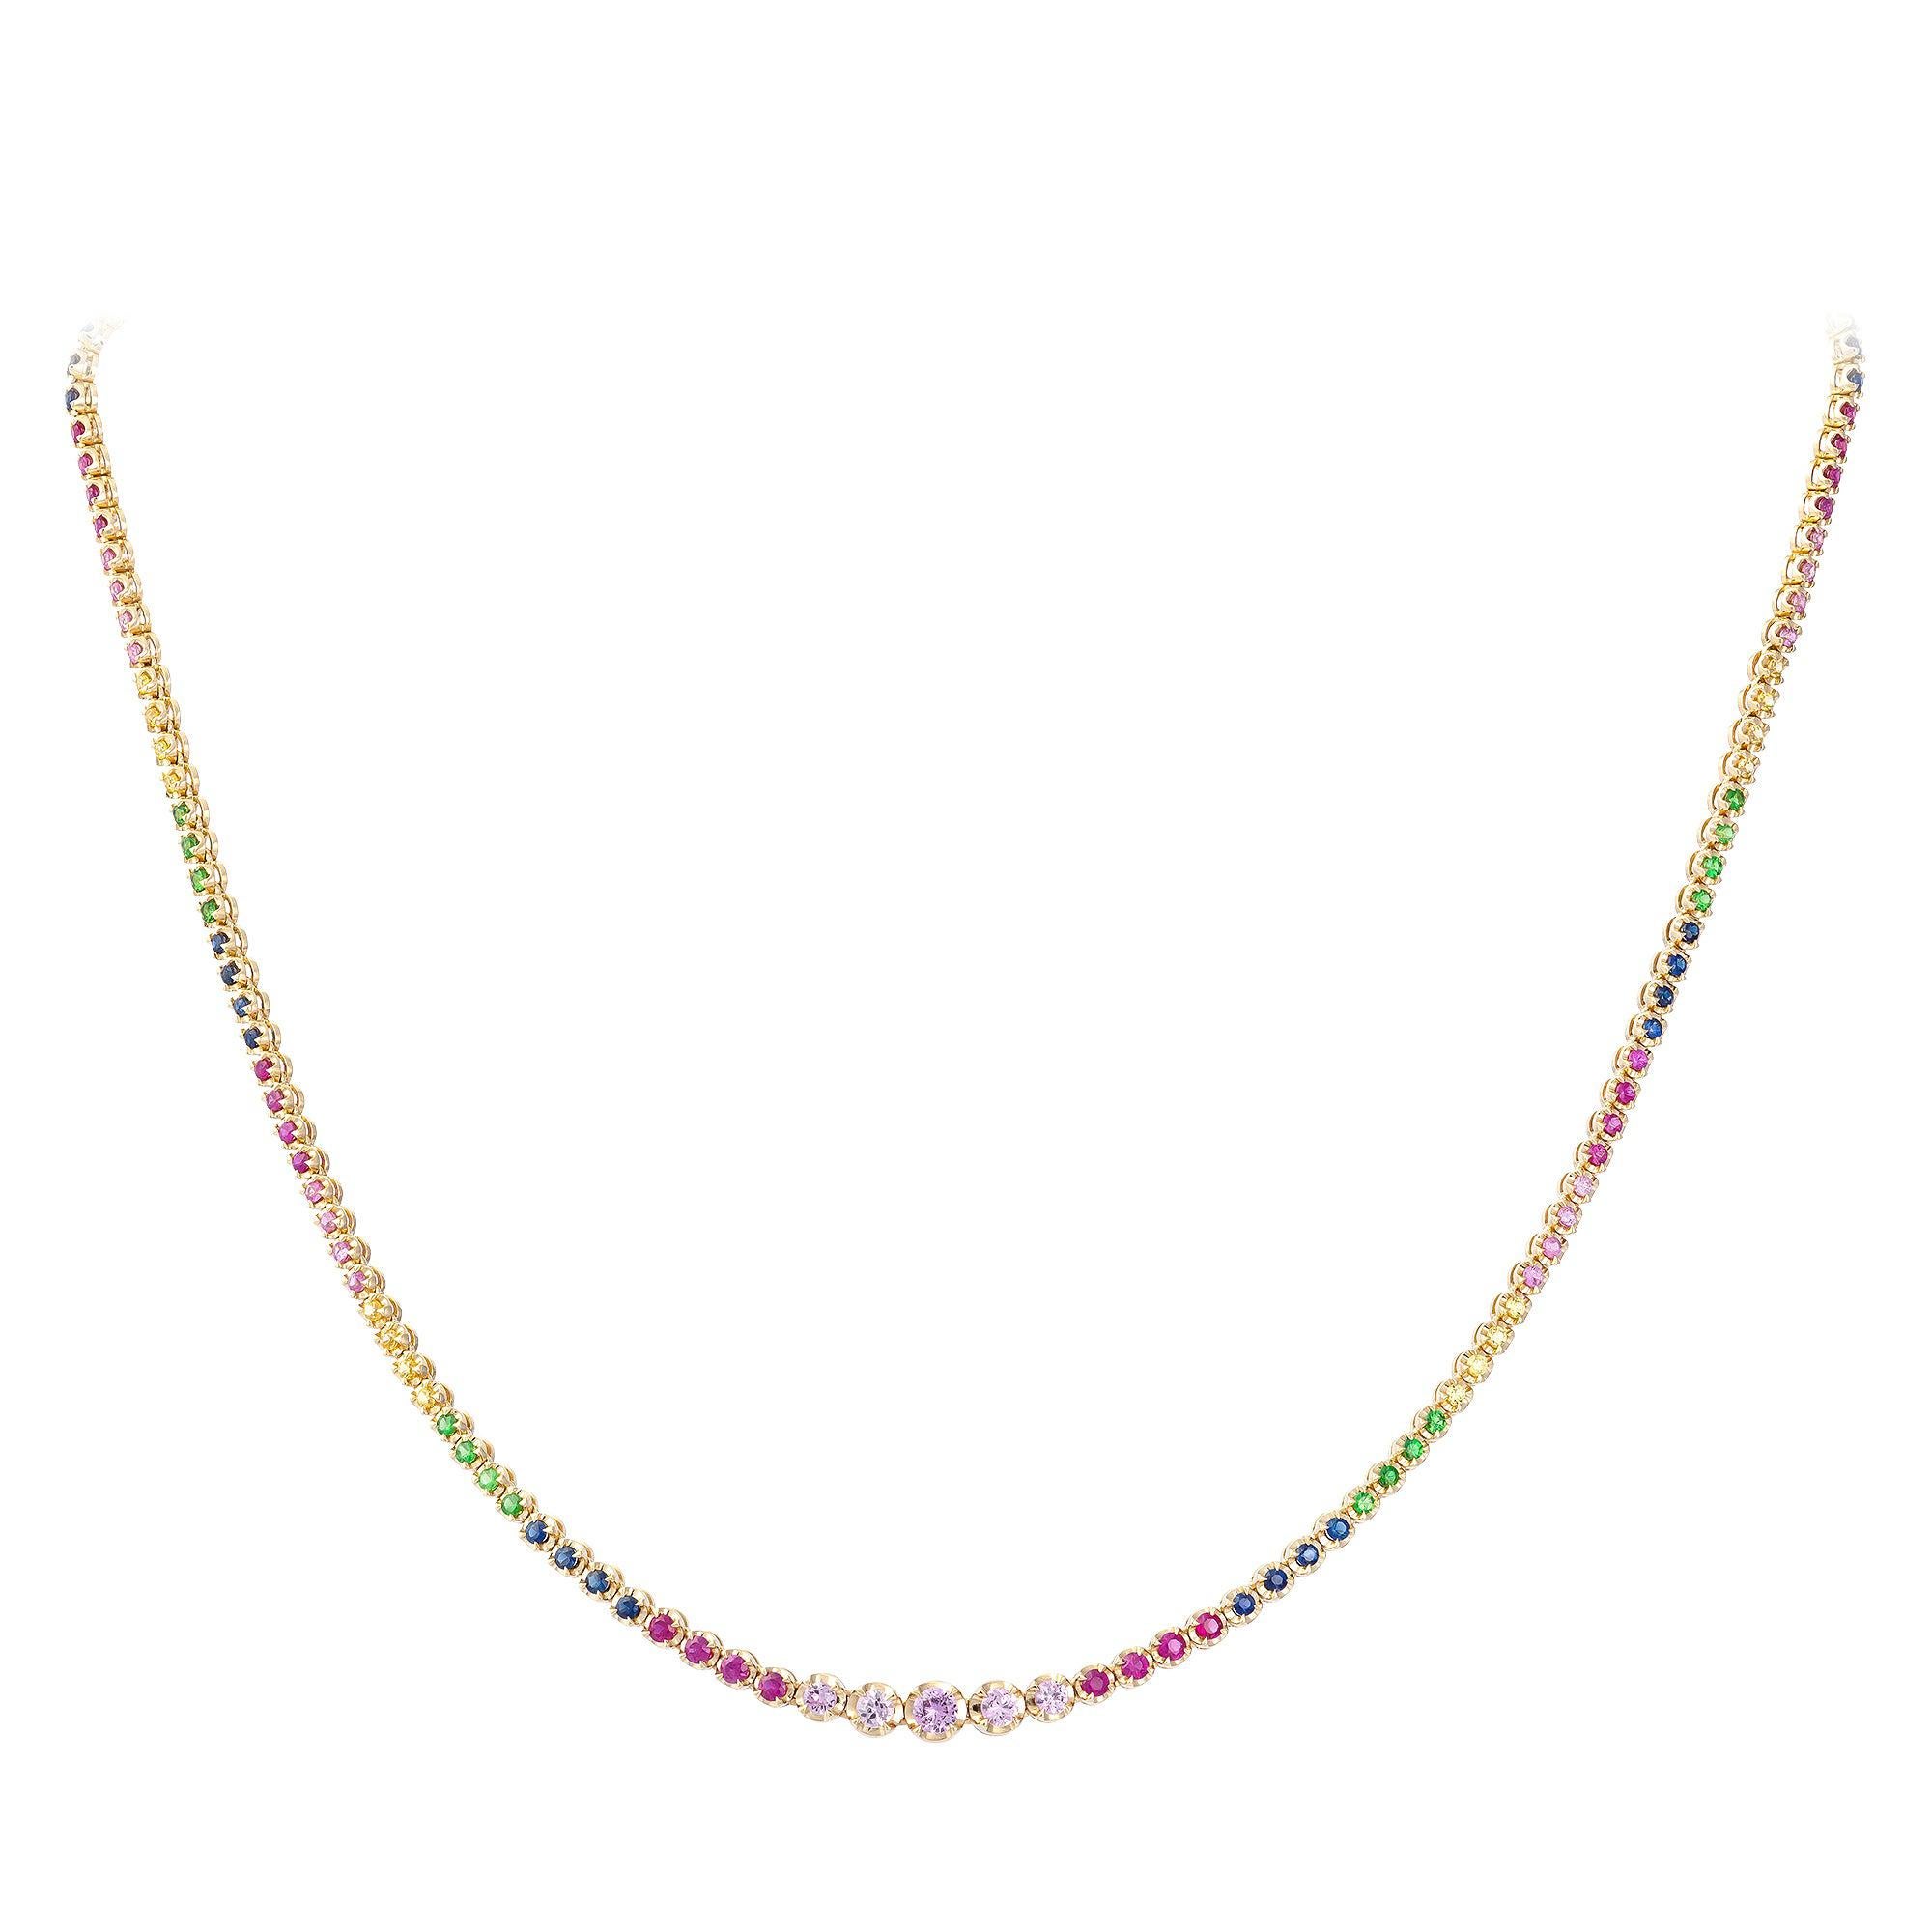 Fashionable Circle Multi Sapphire 18k White Gold Necklace Choker for Her